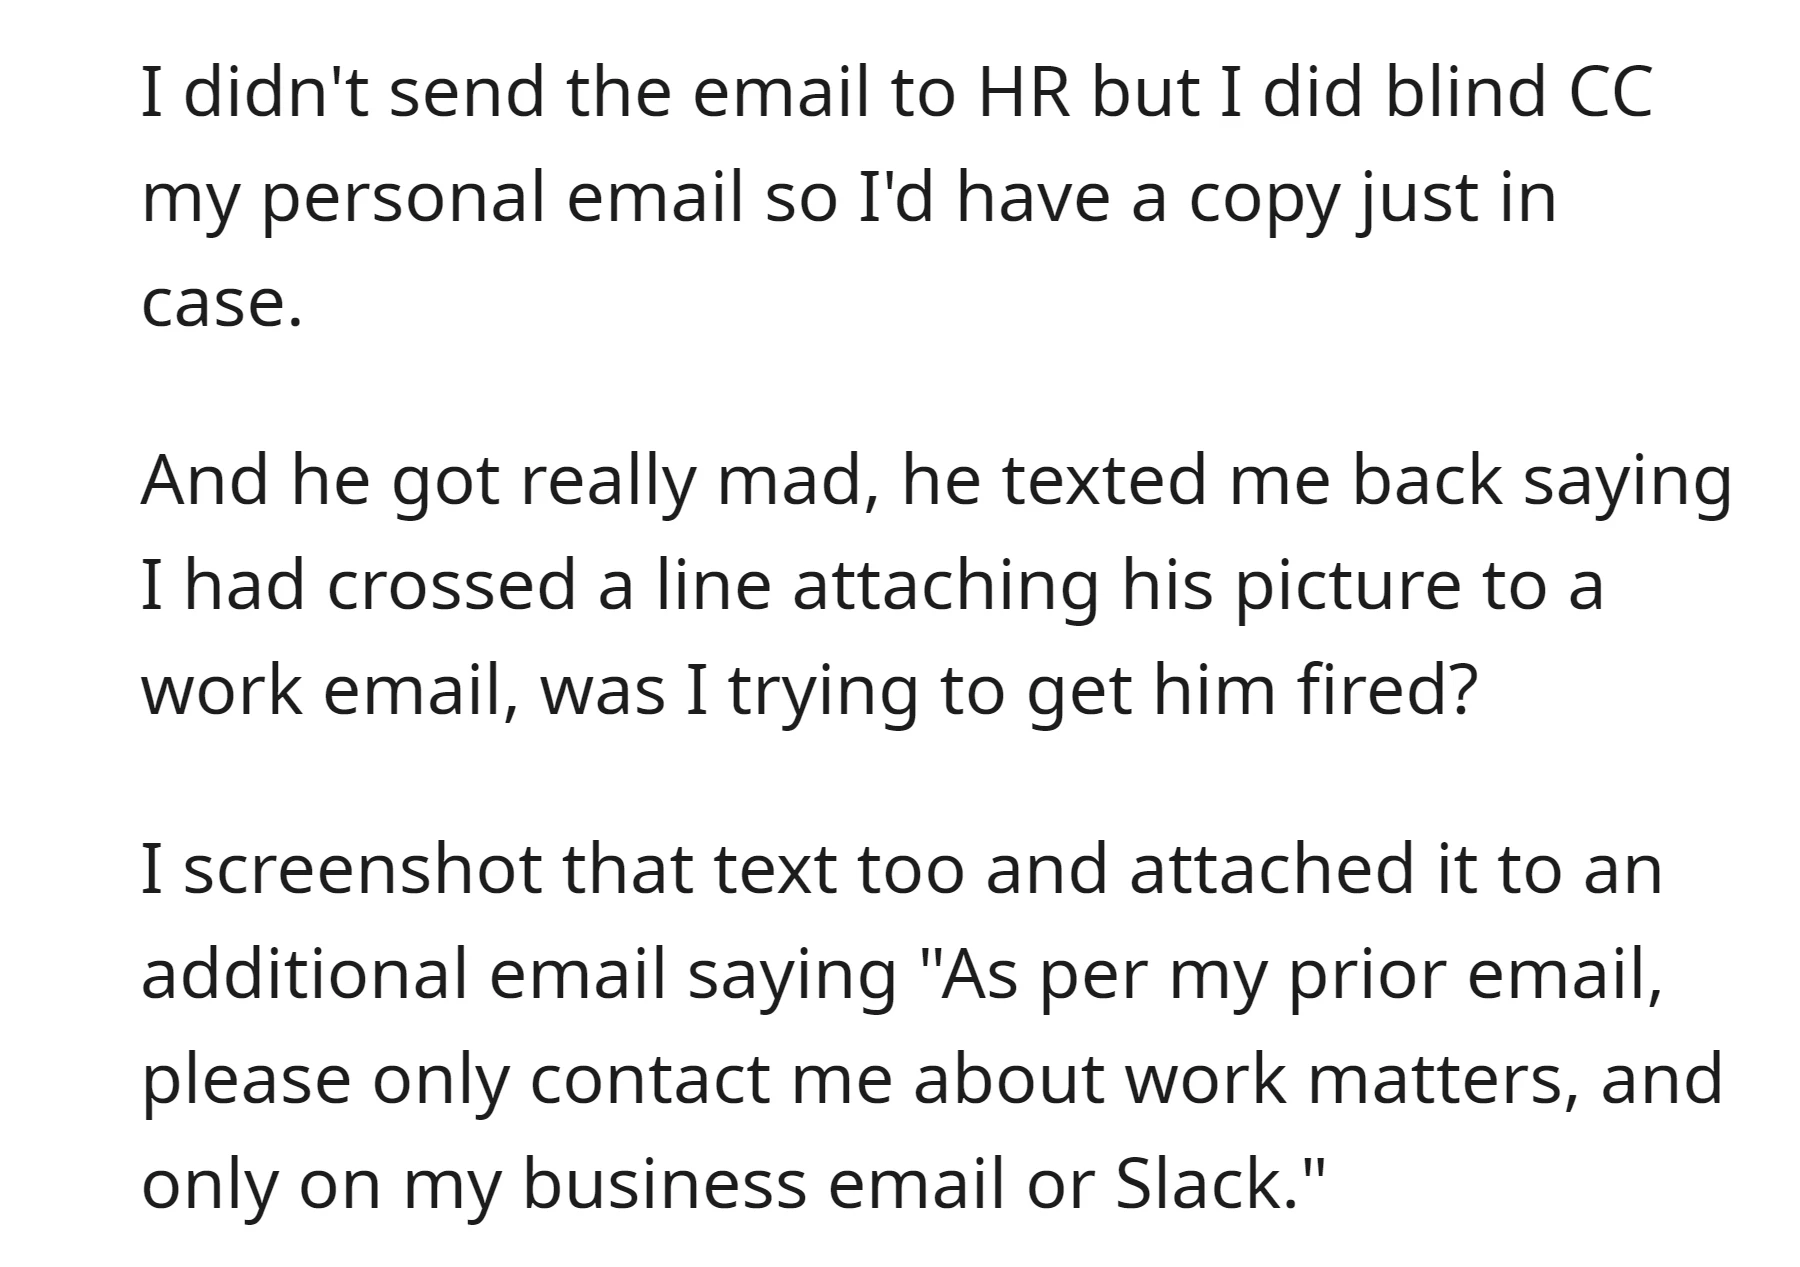 OP faced the coworker's anger for attaching his picture to a work email